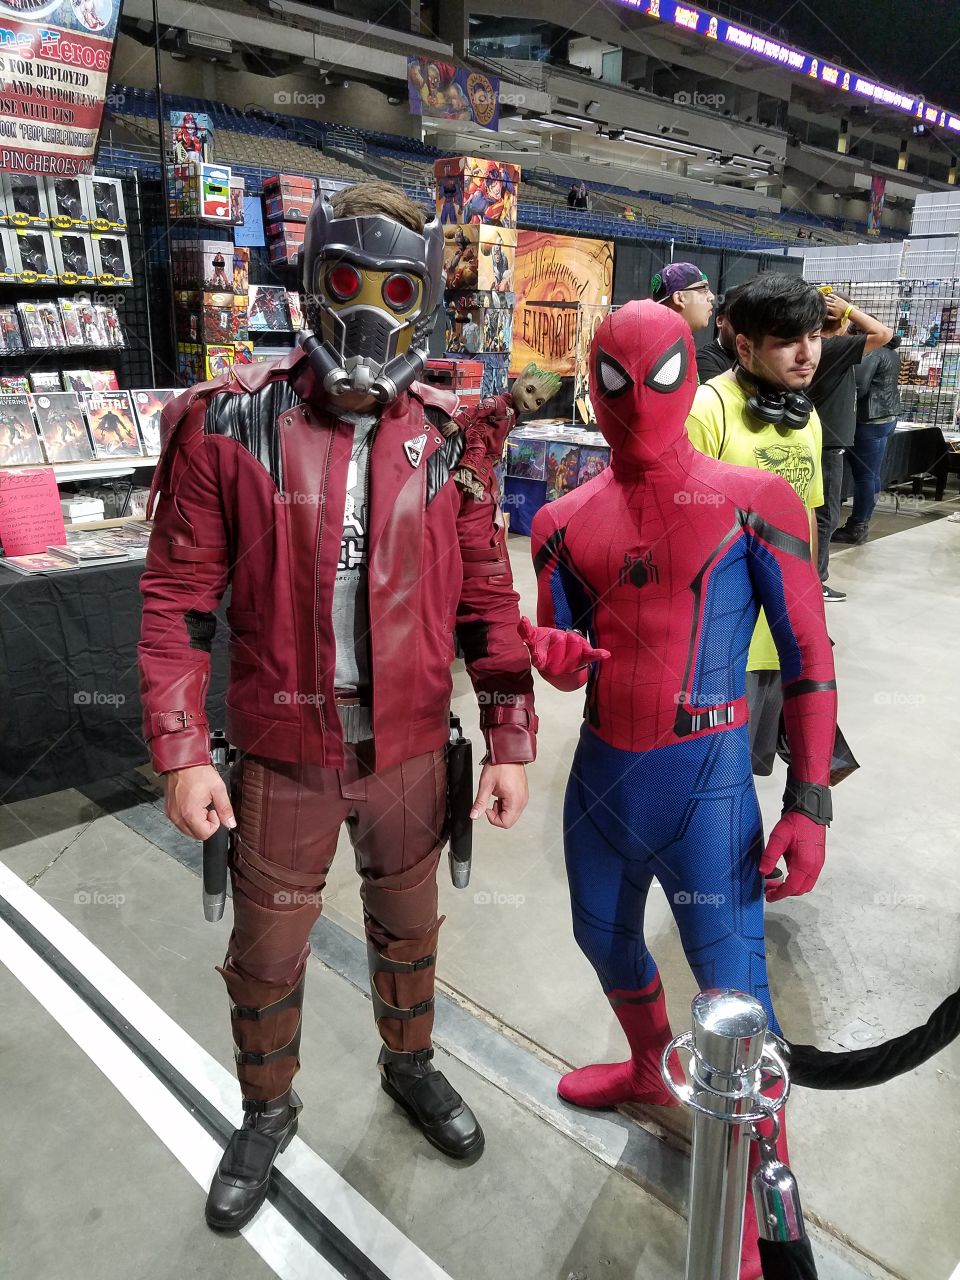 Starlord and Spiderman